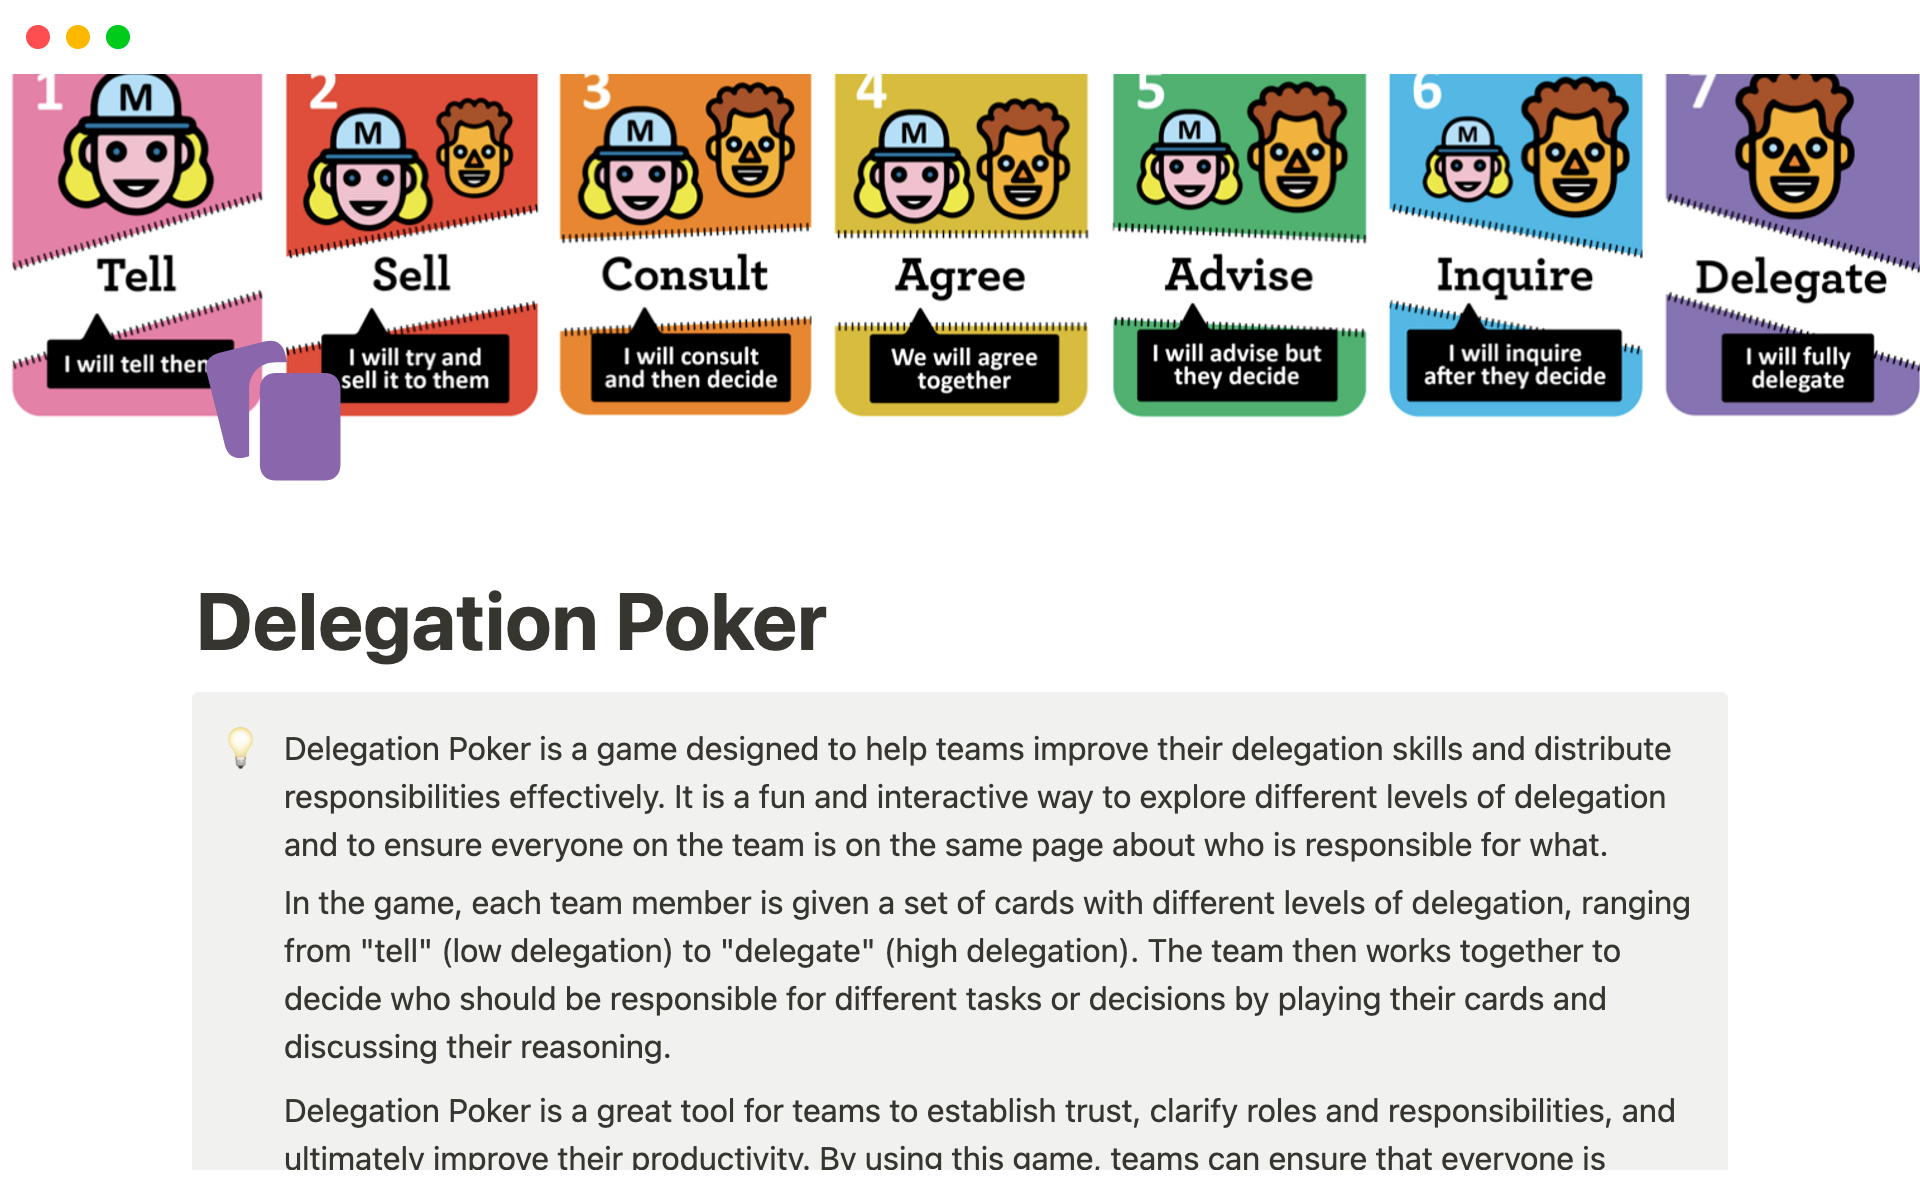 Our customizable Delegation Poker Notion template includes everything you need to facilitate a successful delegation poker session and improve your team's delegation practices.